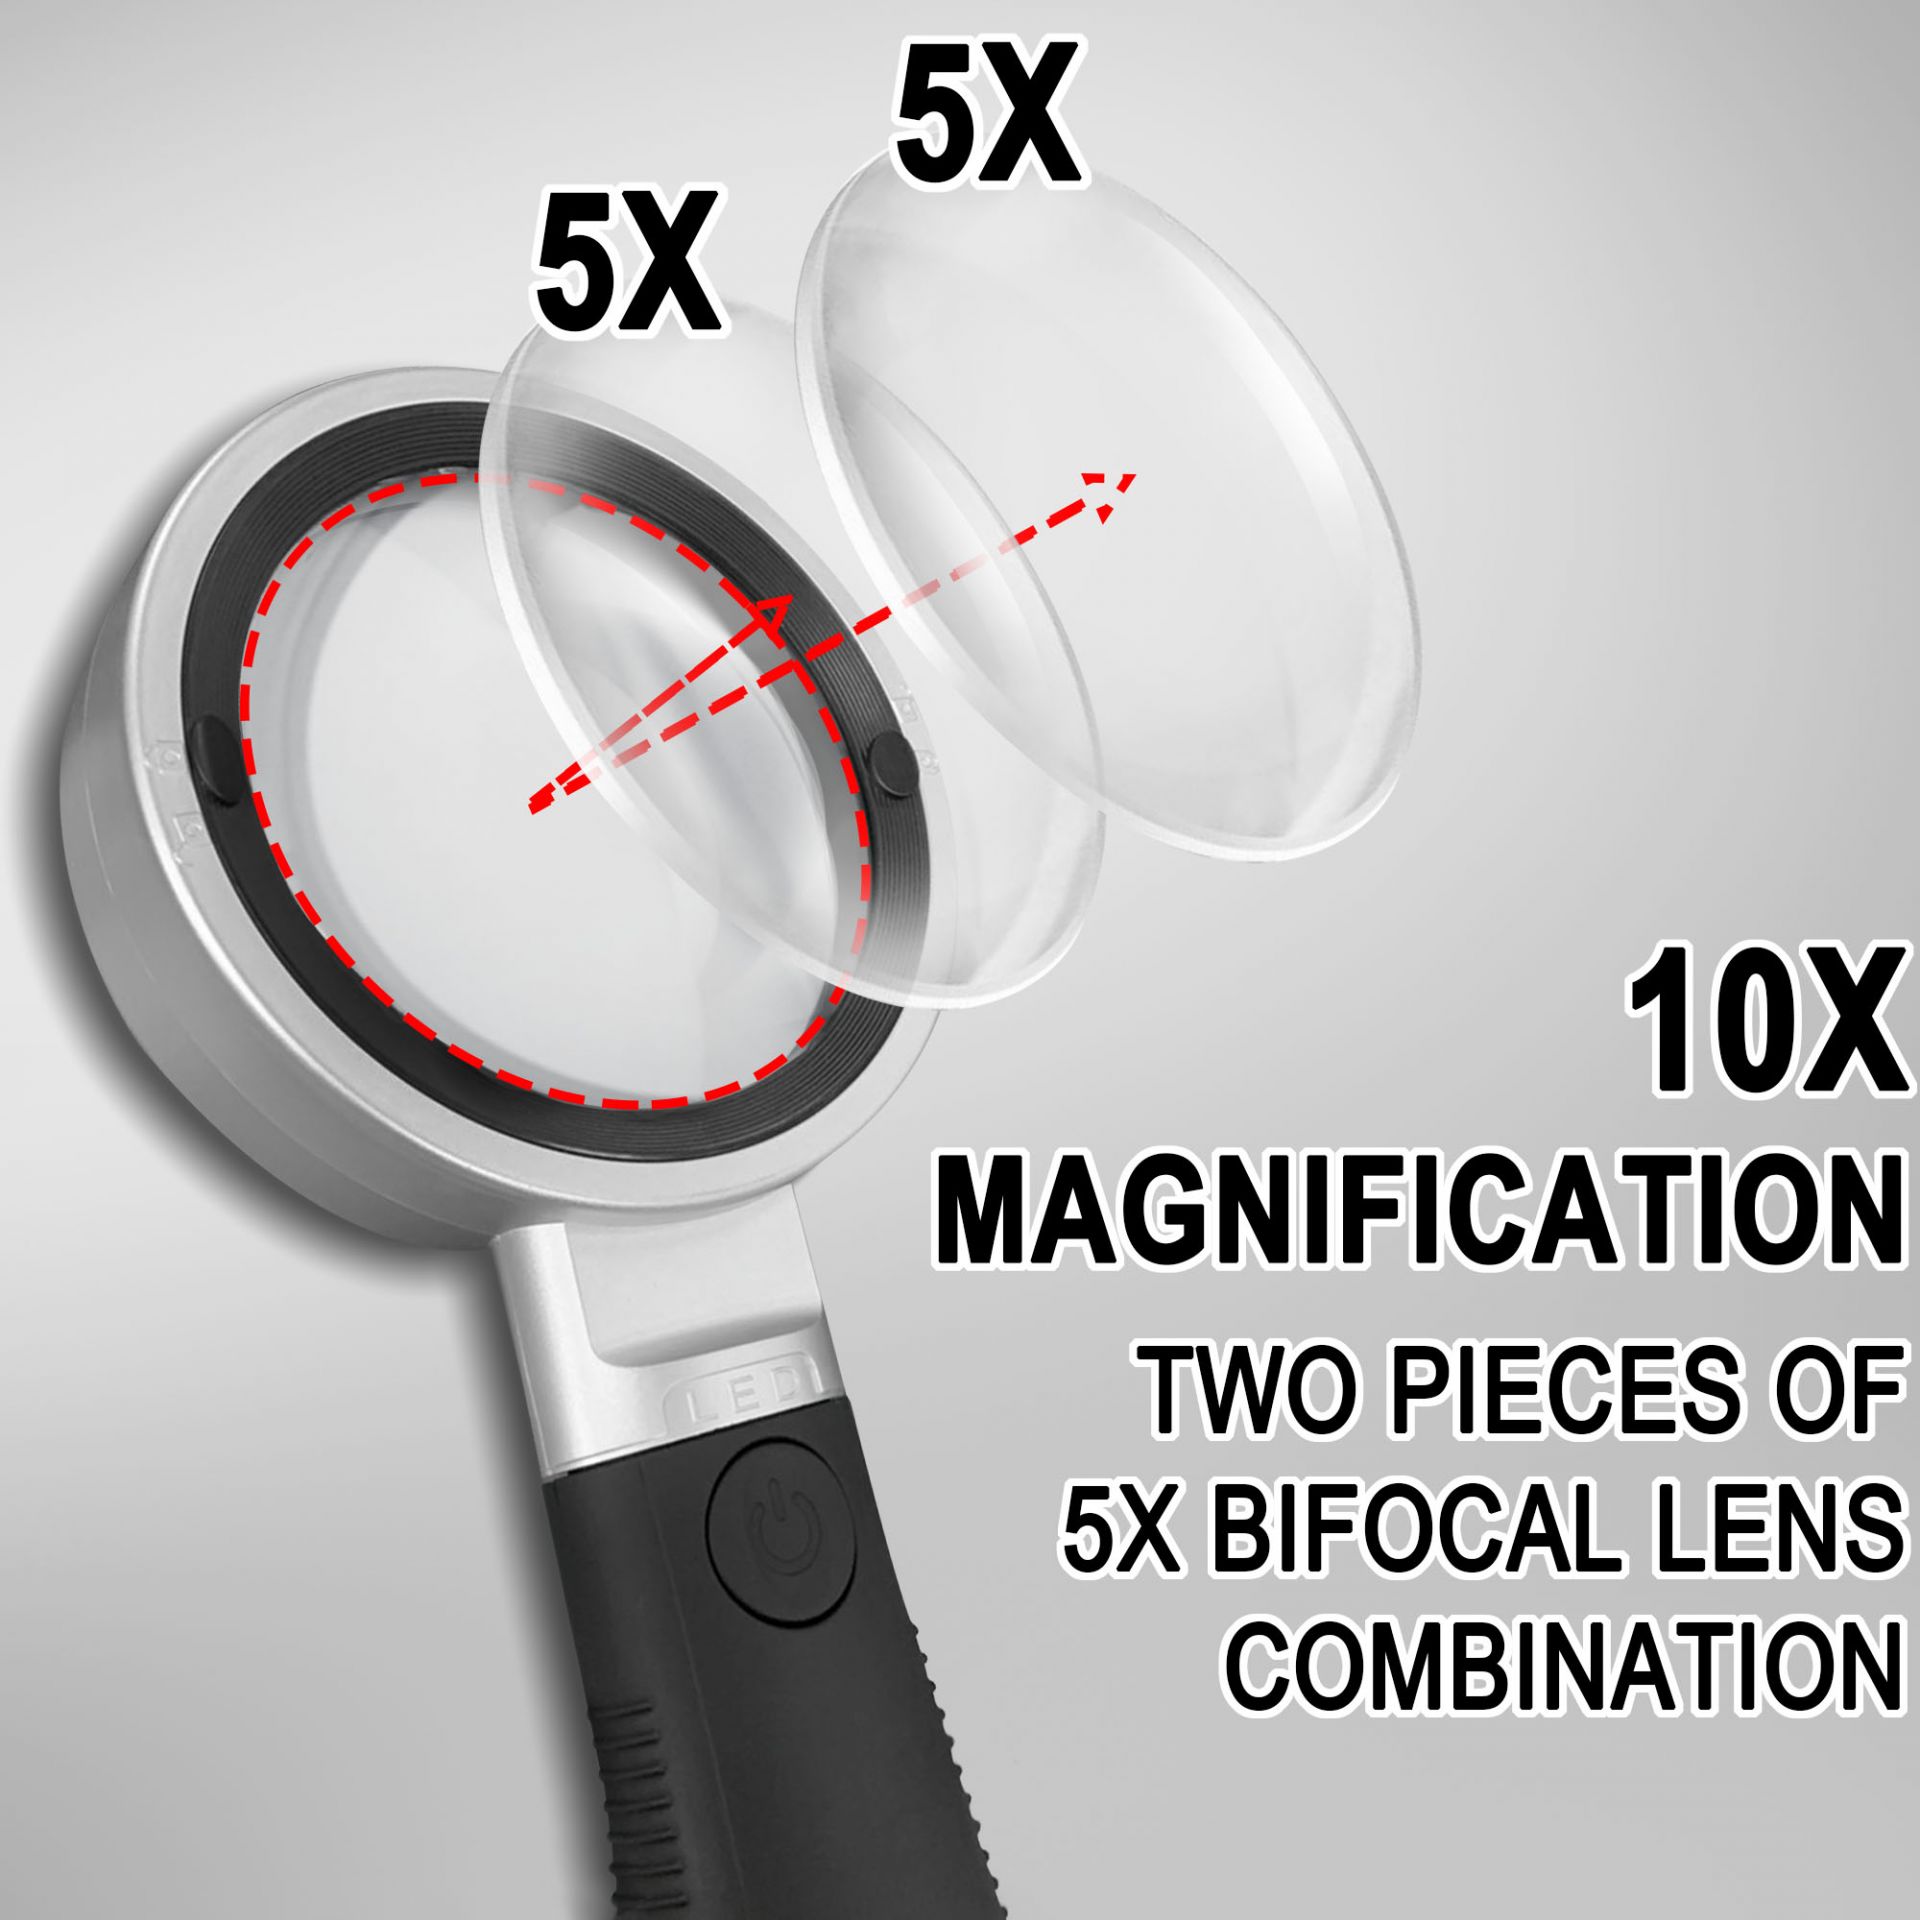 Large LED Lighted Magnifier, Dual Glass Lens 2.5x,10x Reading Magnifier